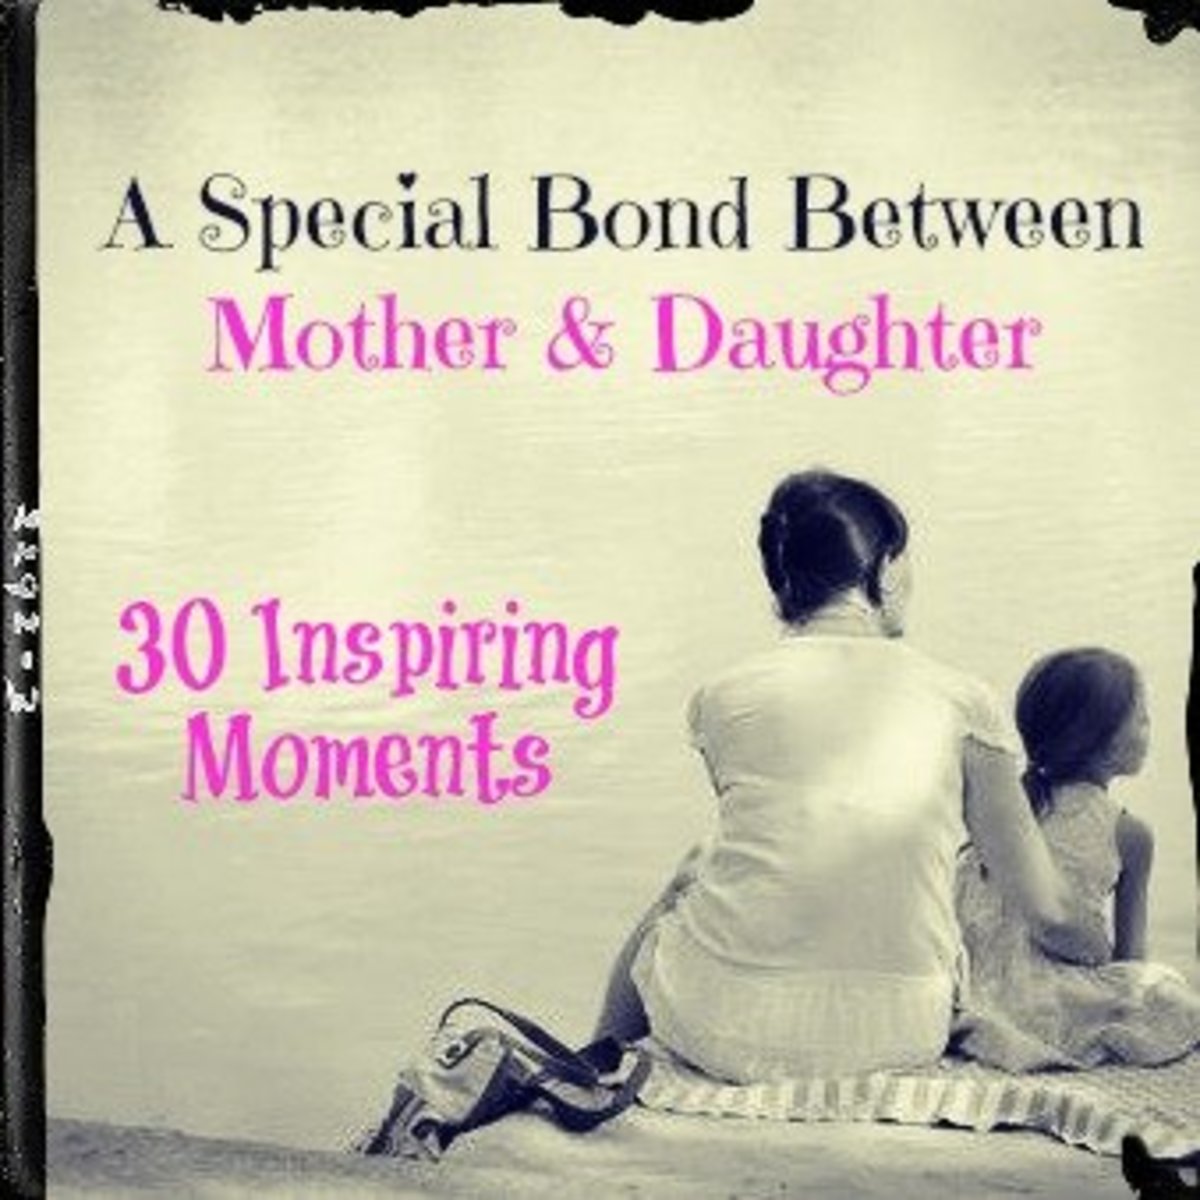 The Special Bond Between Mothers And Daughters  HubPages